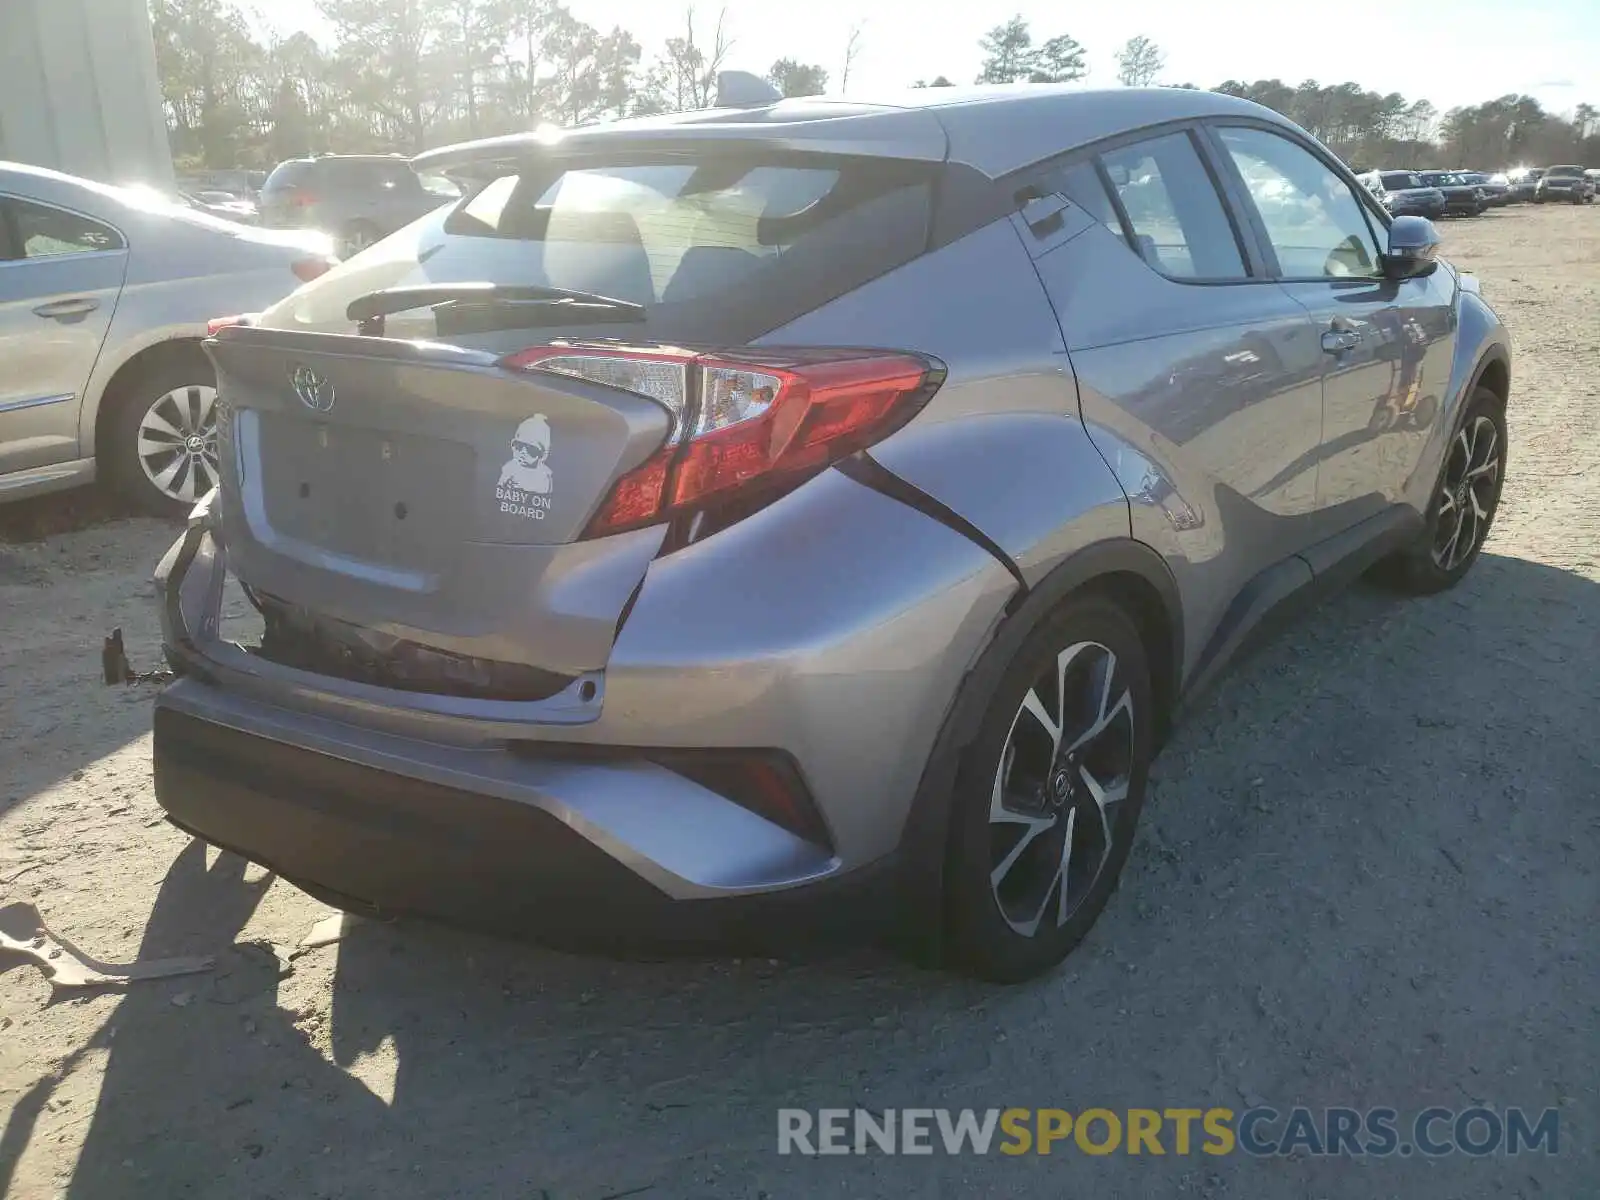 4 Photograph of a damaged car NMTKHMBXXKR097130 TOYOTA C-HR 2019